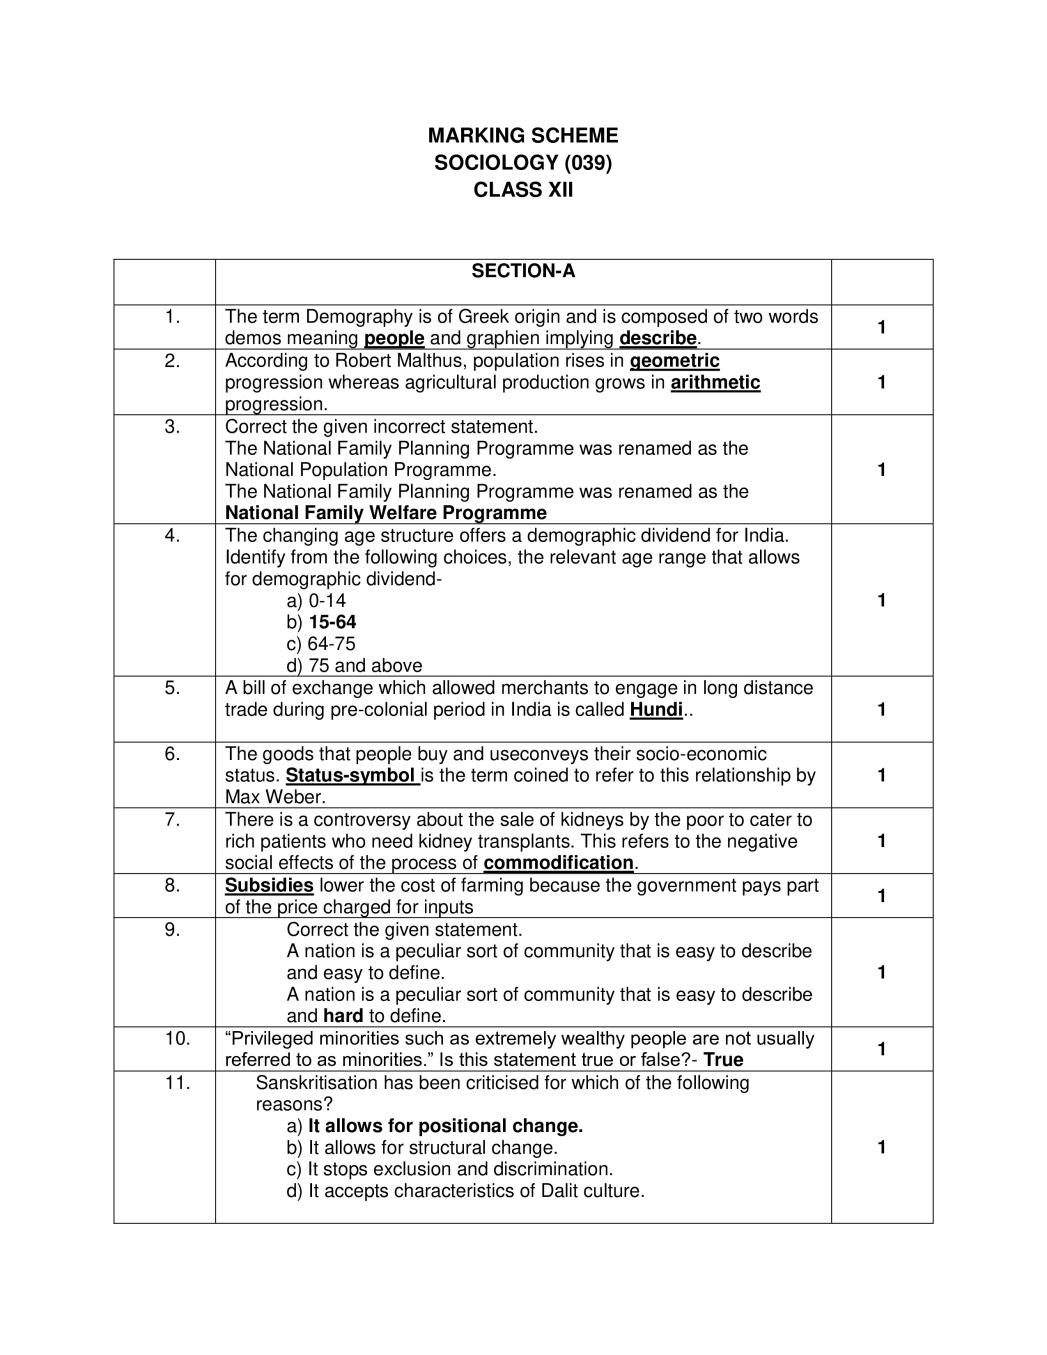 CBSE Class 12 Marking Scheme 2020 for Sociology - Page 1